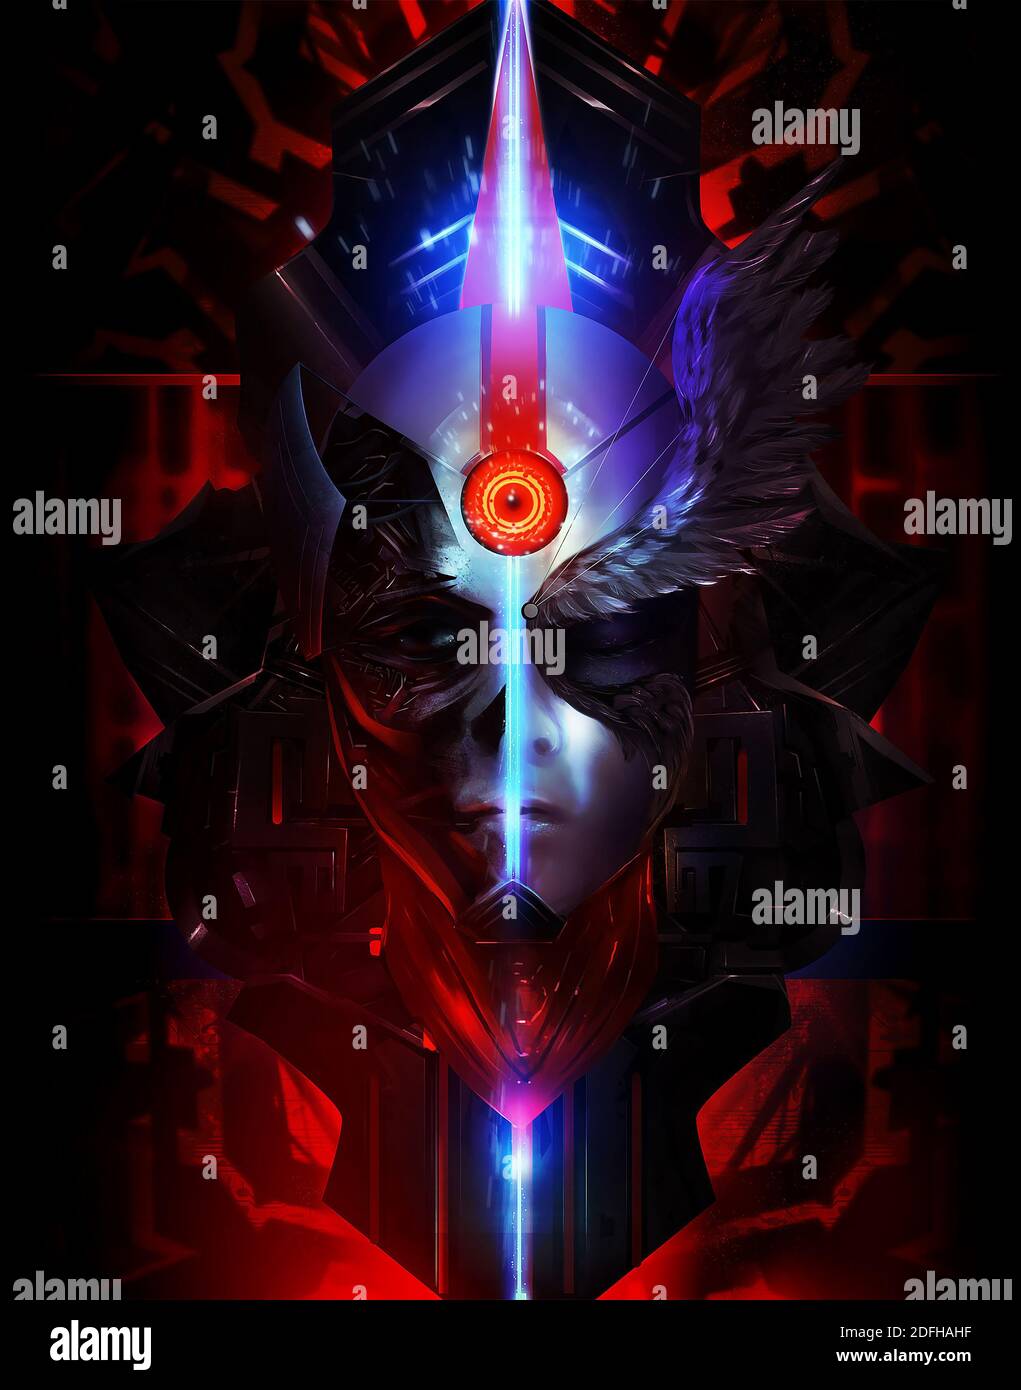 Scifi angel and devil looking mask portrait illustration with neon lights and metal shapes. Stock Photo